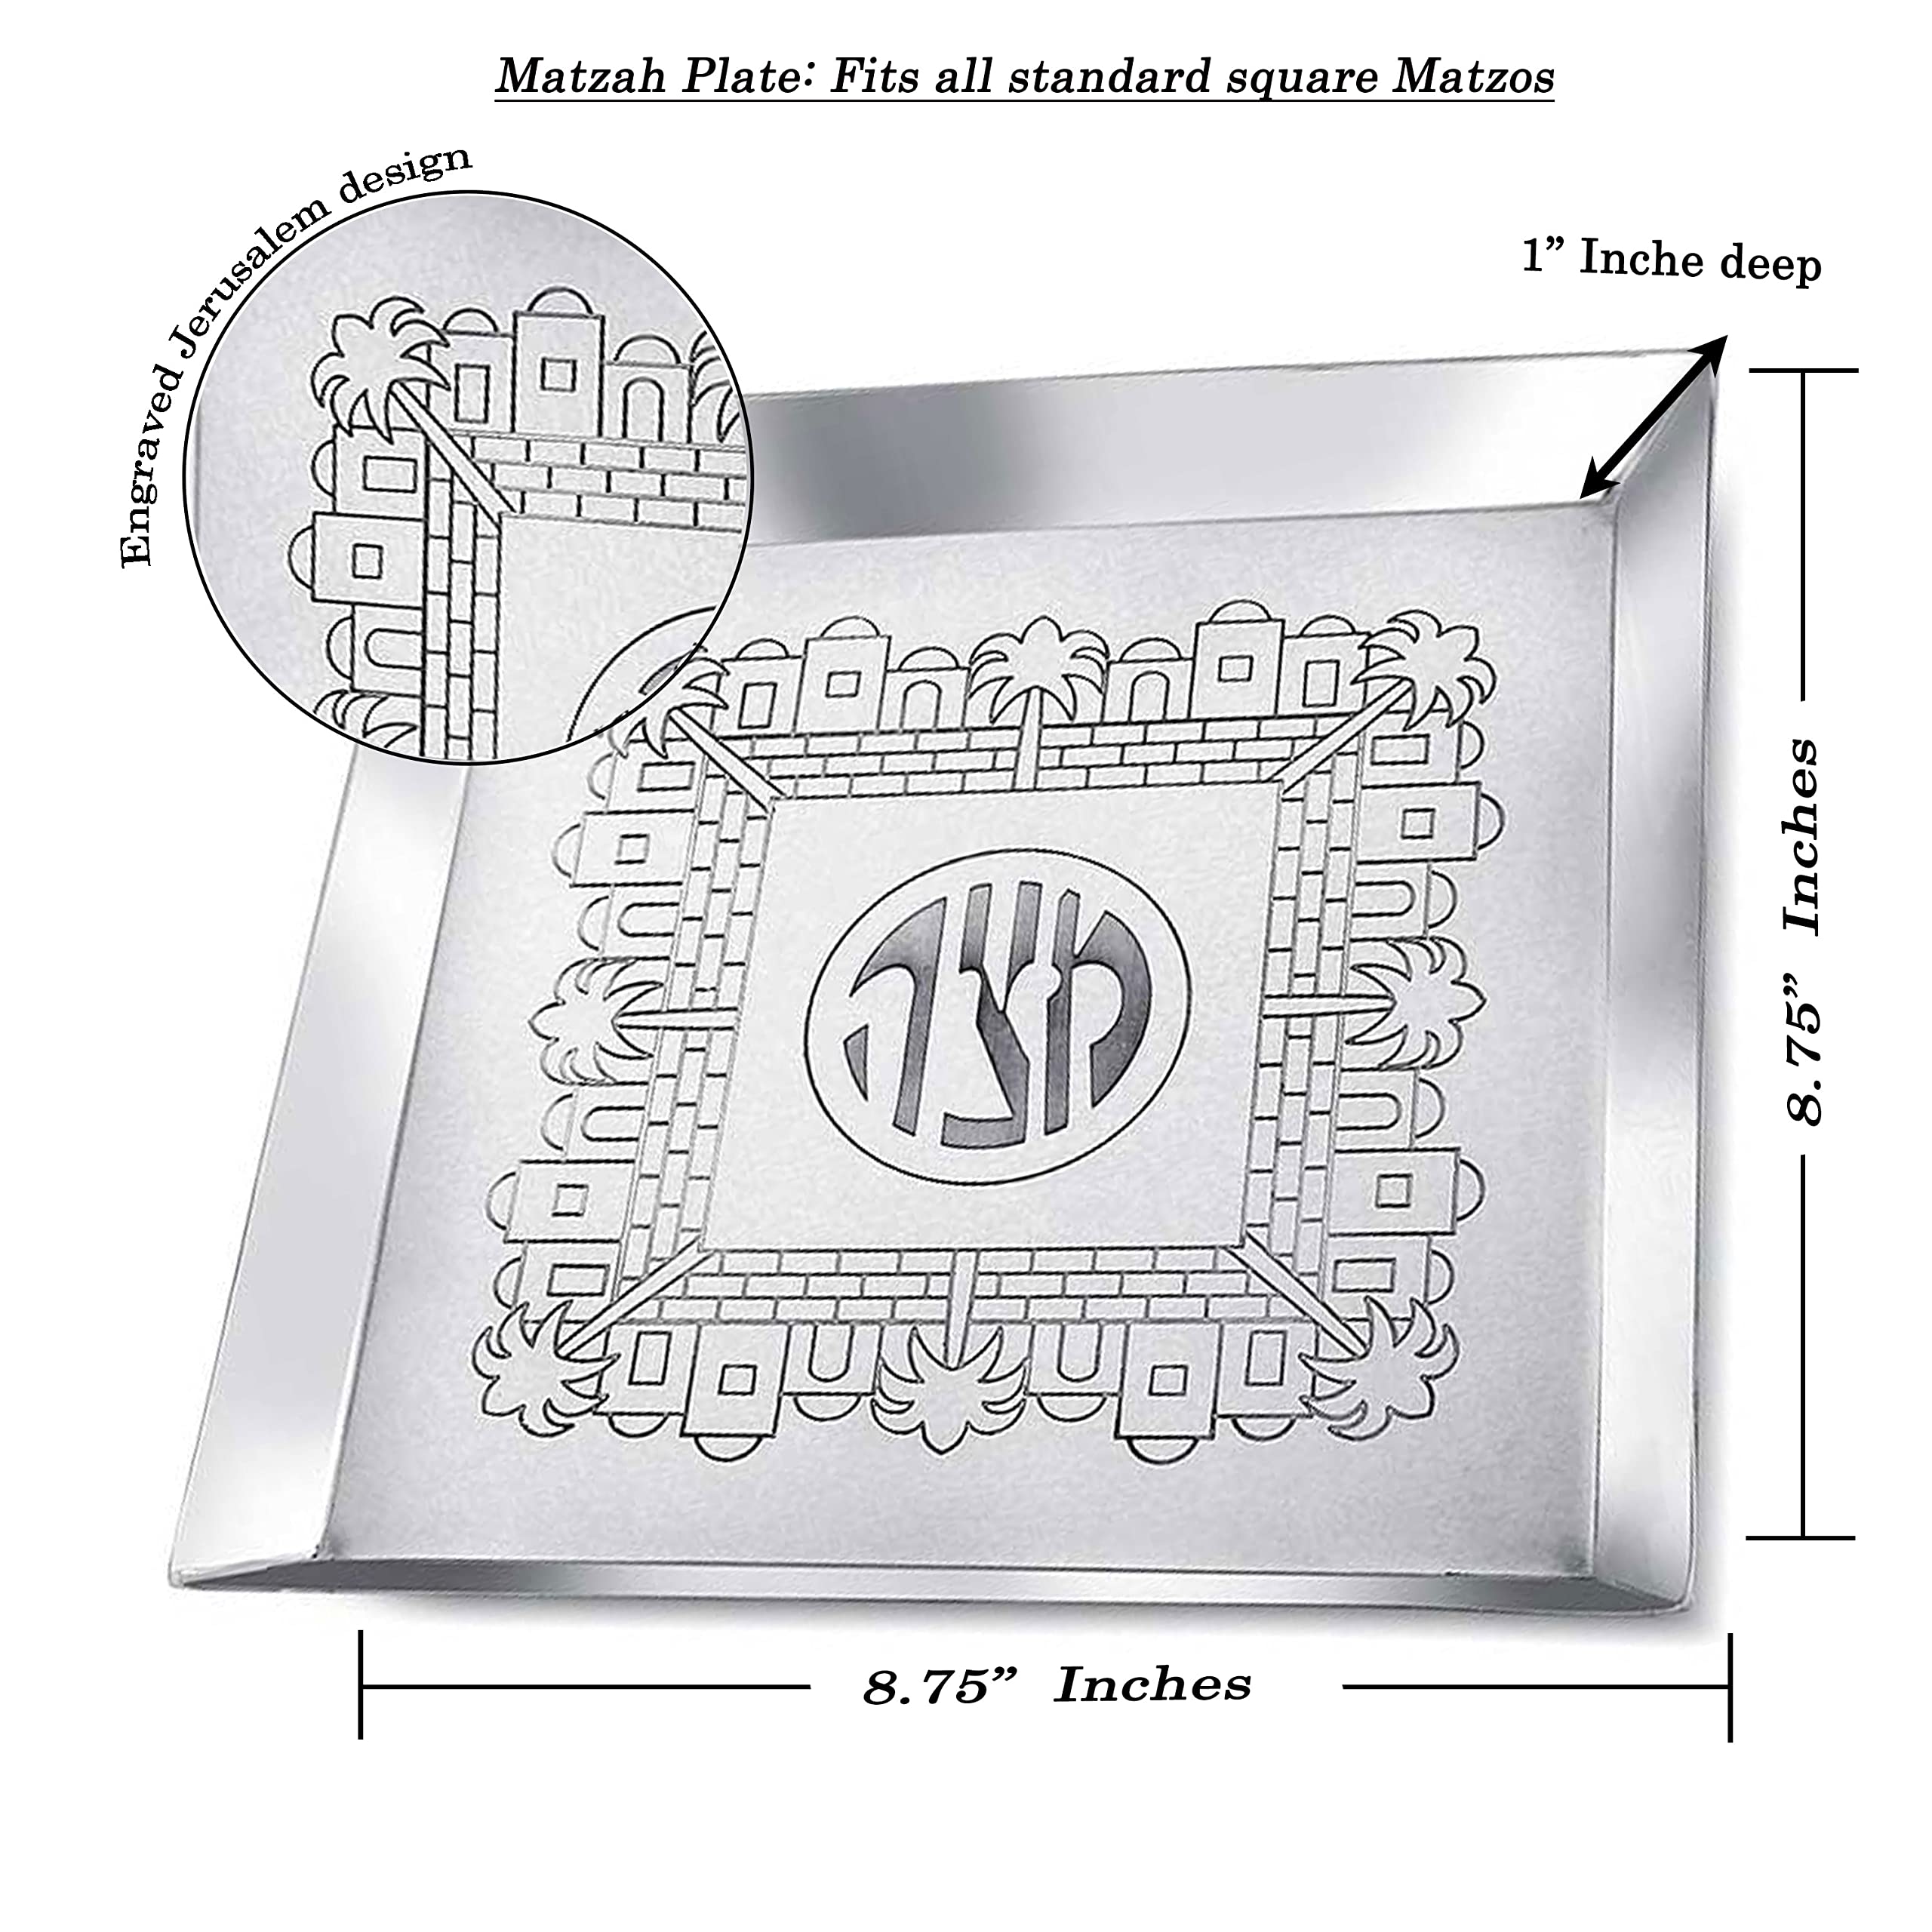 Zion Judaica Passover Matzo Tray Jerusalem Classics Seder Collection 8'' Square Passover Plate for Matzos Non-Tarnish Pesach Seder Table Decorative Plates Gift Passover Decorations